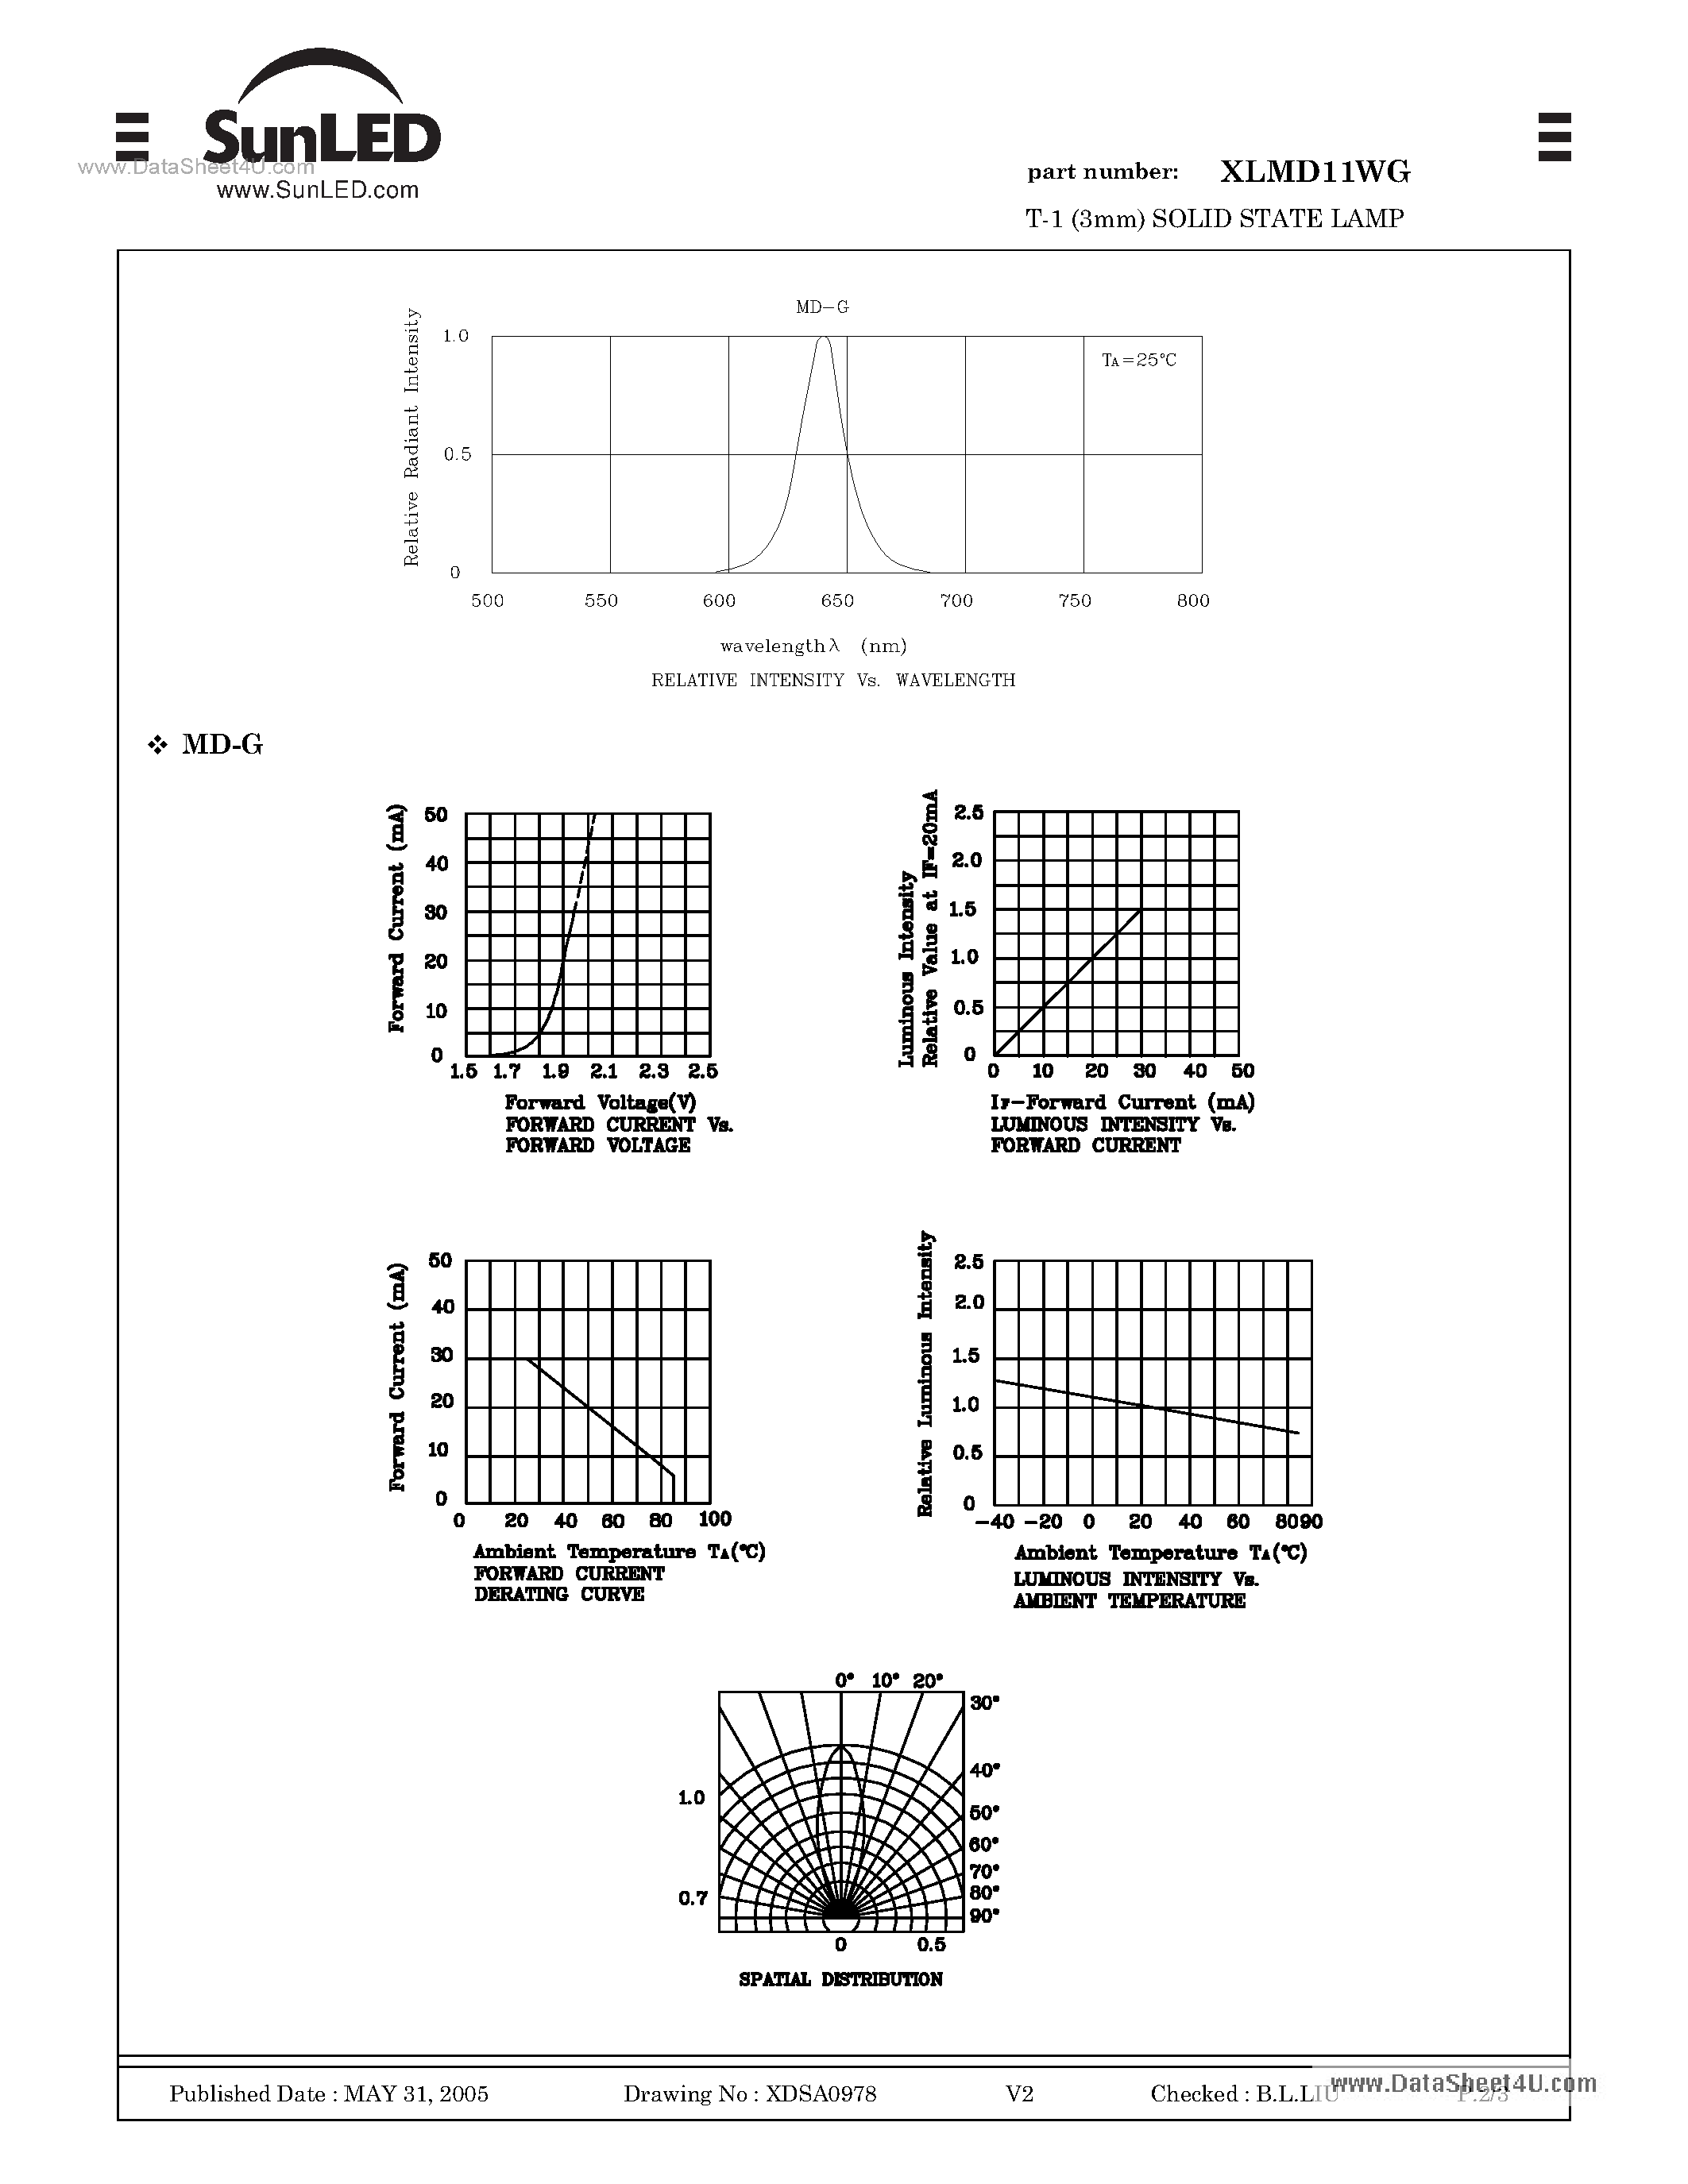 Datasheet XLMD11WG - SOLID STATE LAMP page 2